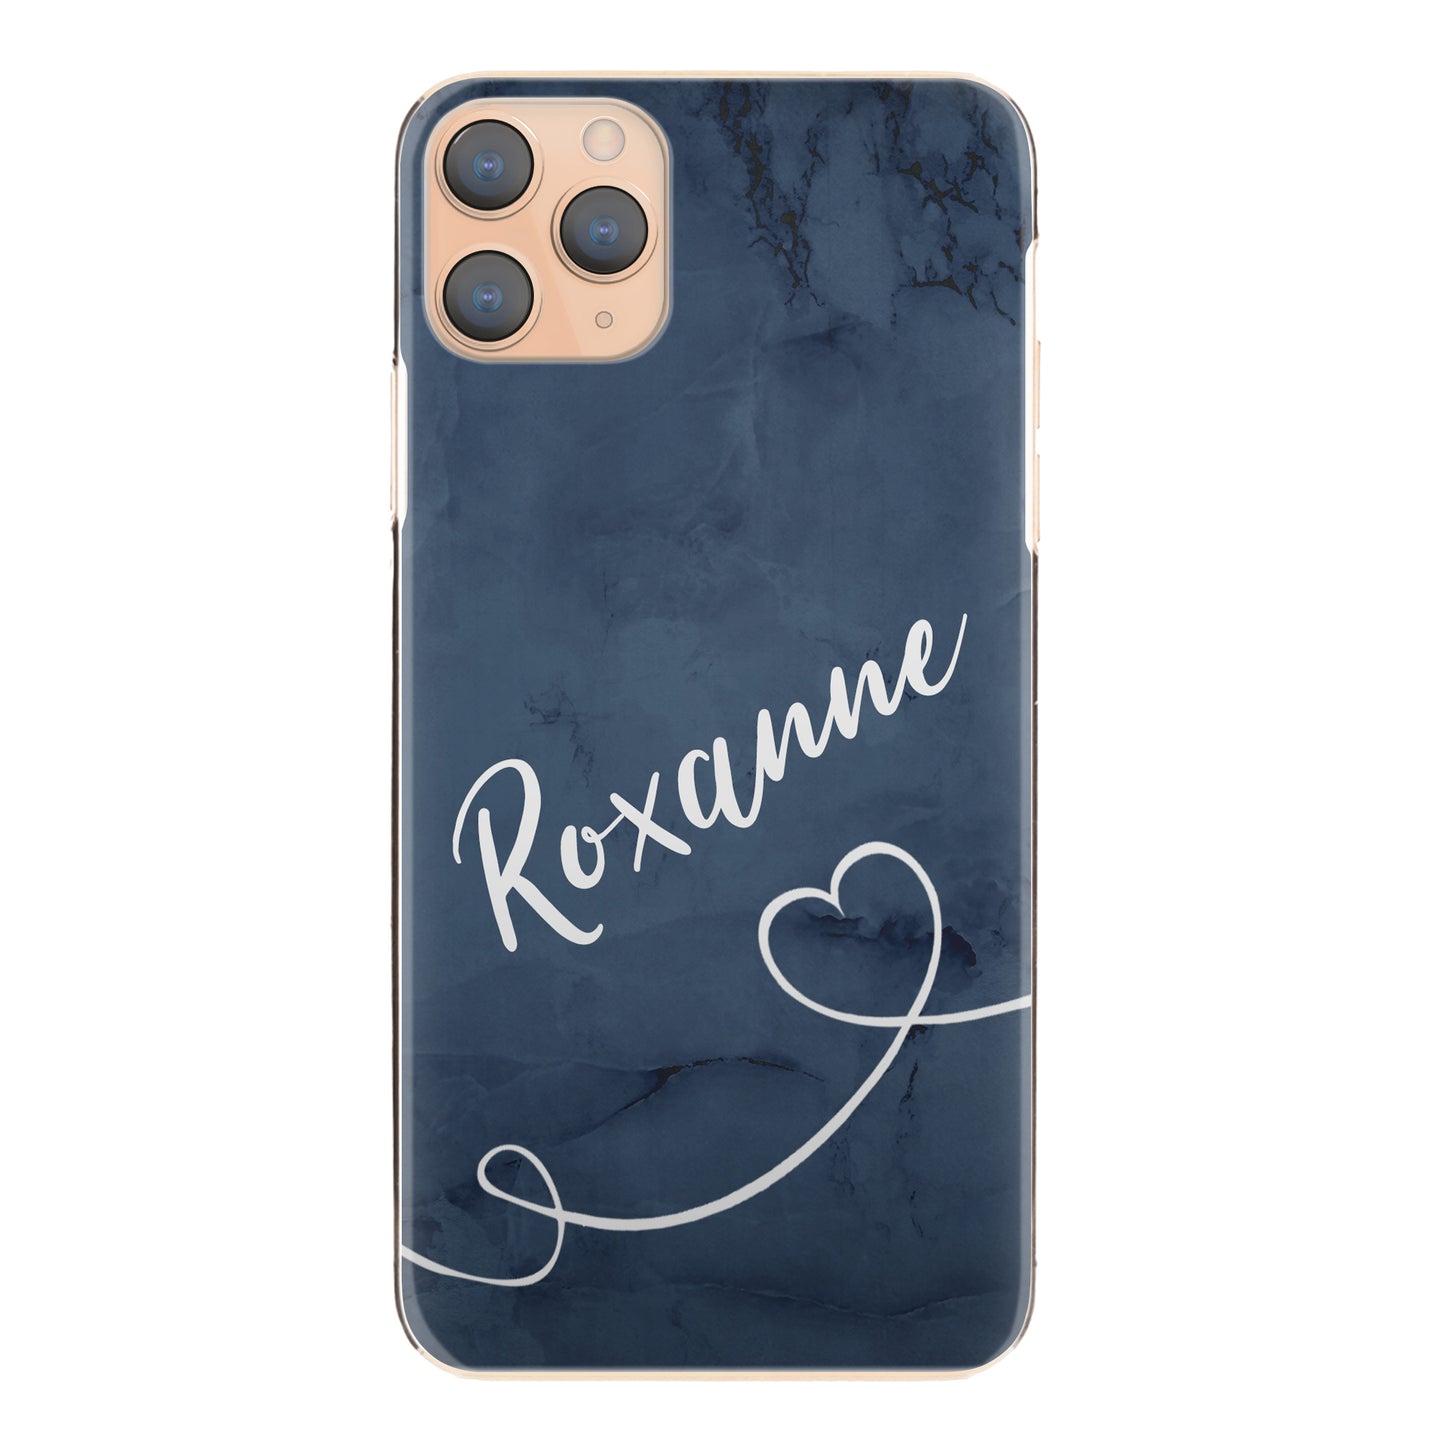 Personalised Nokia Phone Hard Case with Stylish Text and Heart Line on Blue Marble